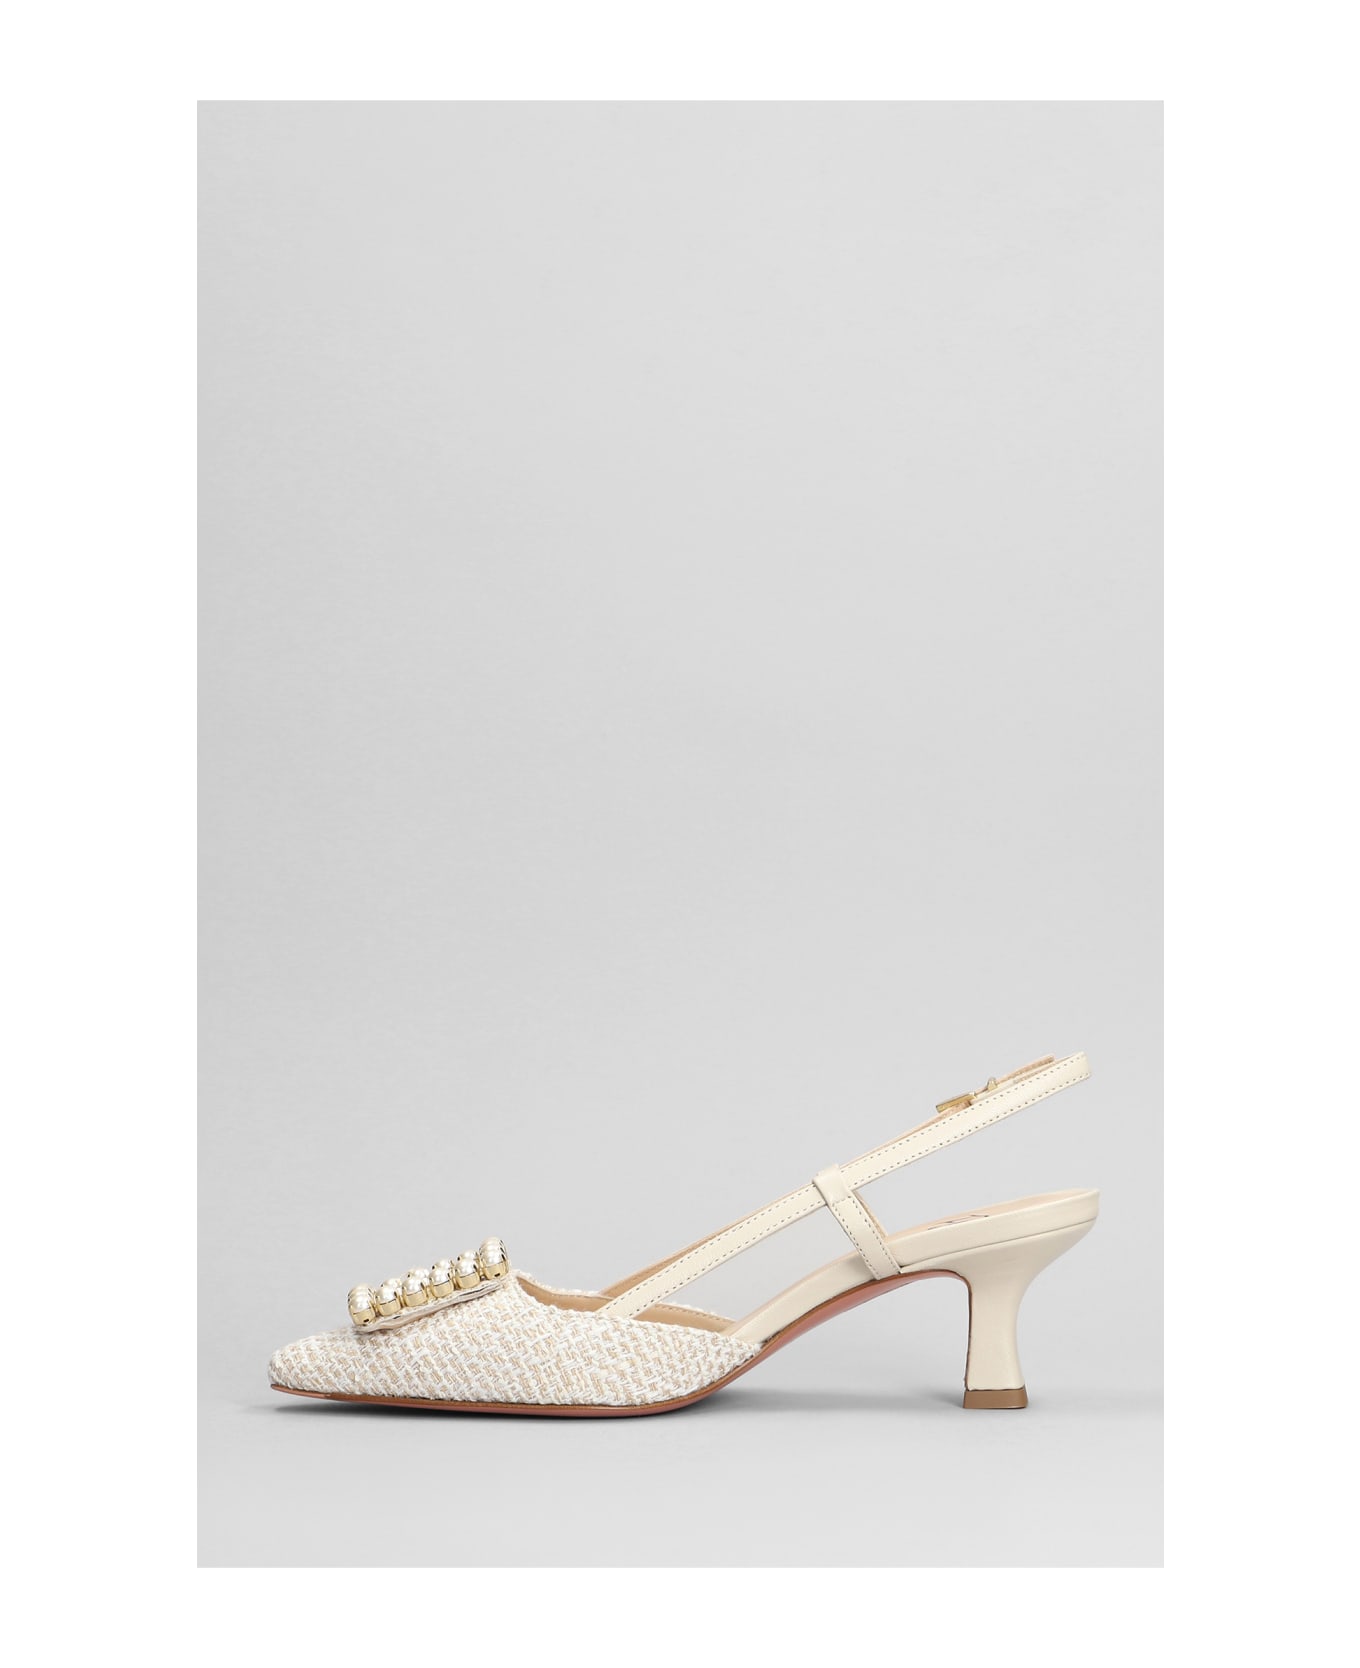 Roberto Festa Stefi Pumps In Beige Leather And Fabric - beige